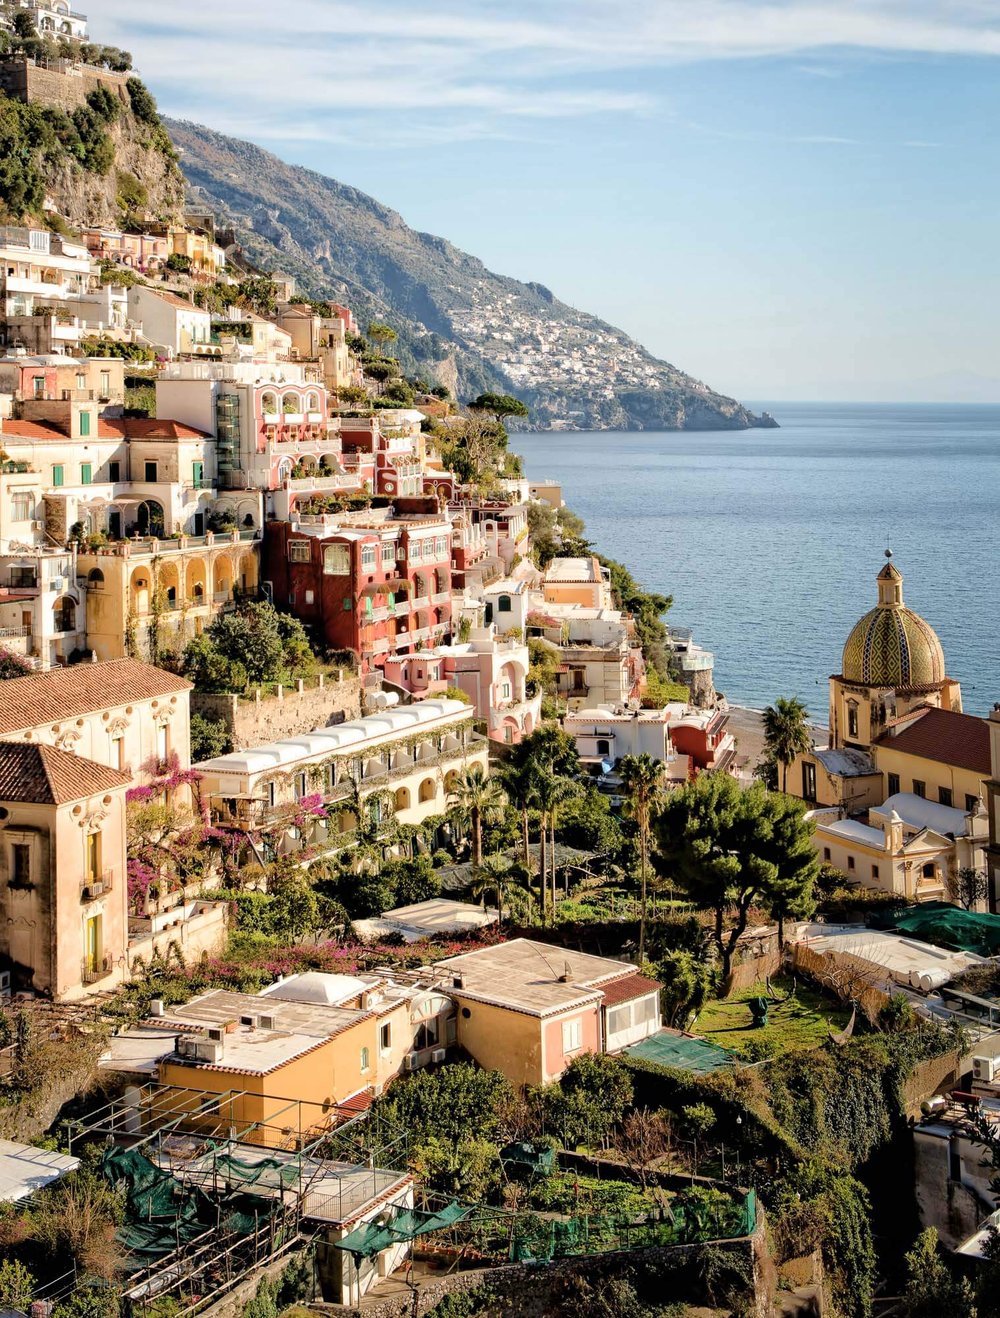 How to get from Sorrento to Positano also comes with a handful of options.